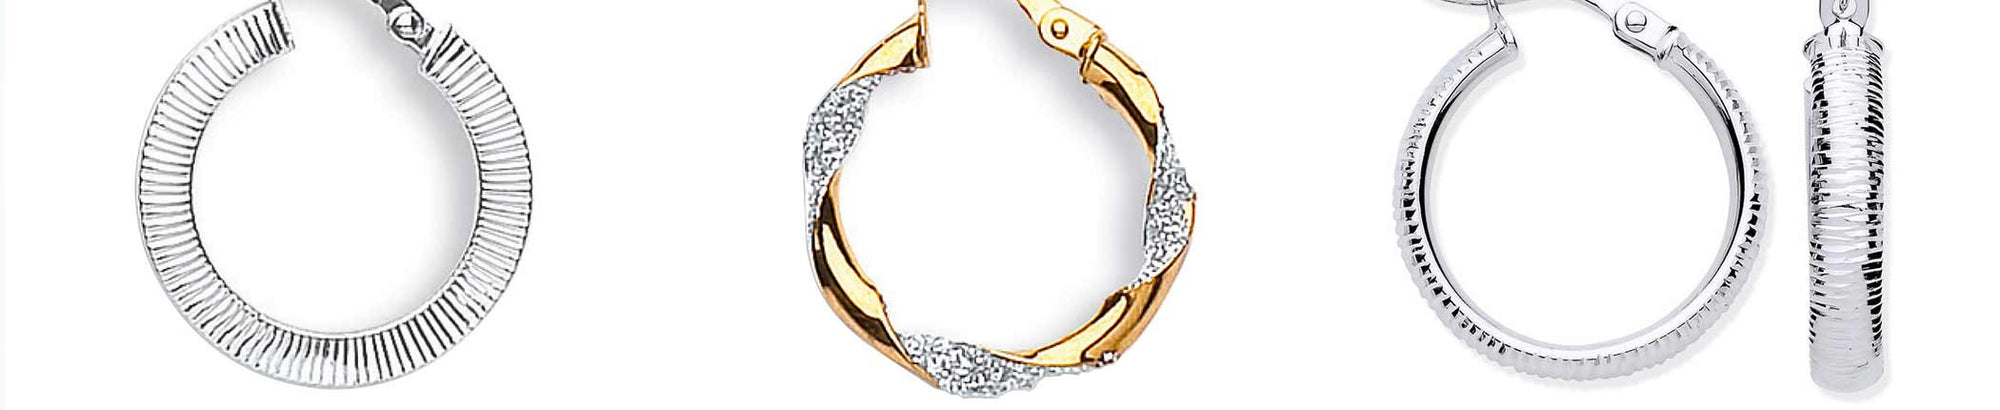 <font color=#000000>9 ways to wear wide silver hoops</font>